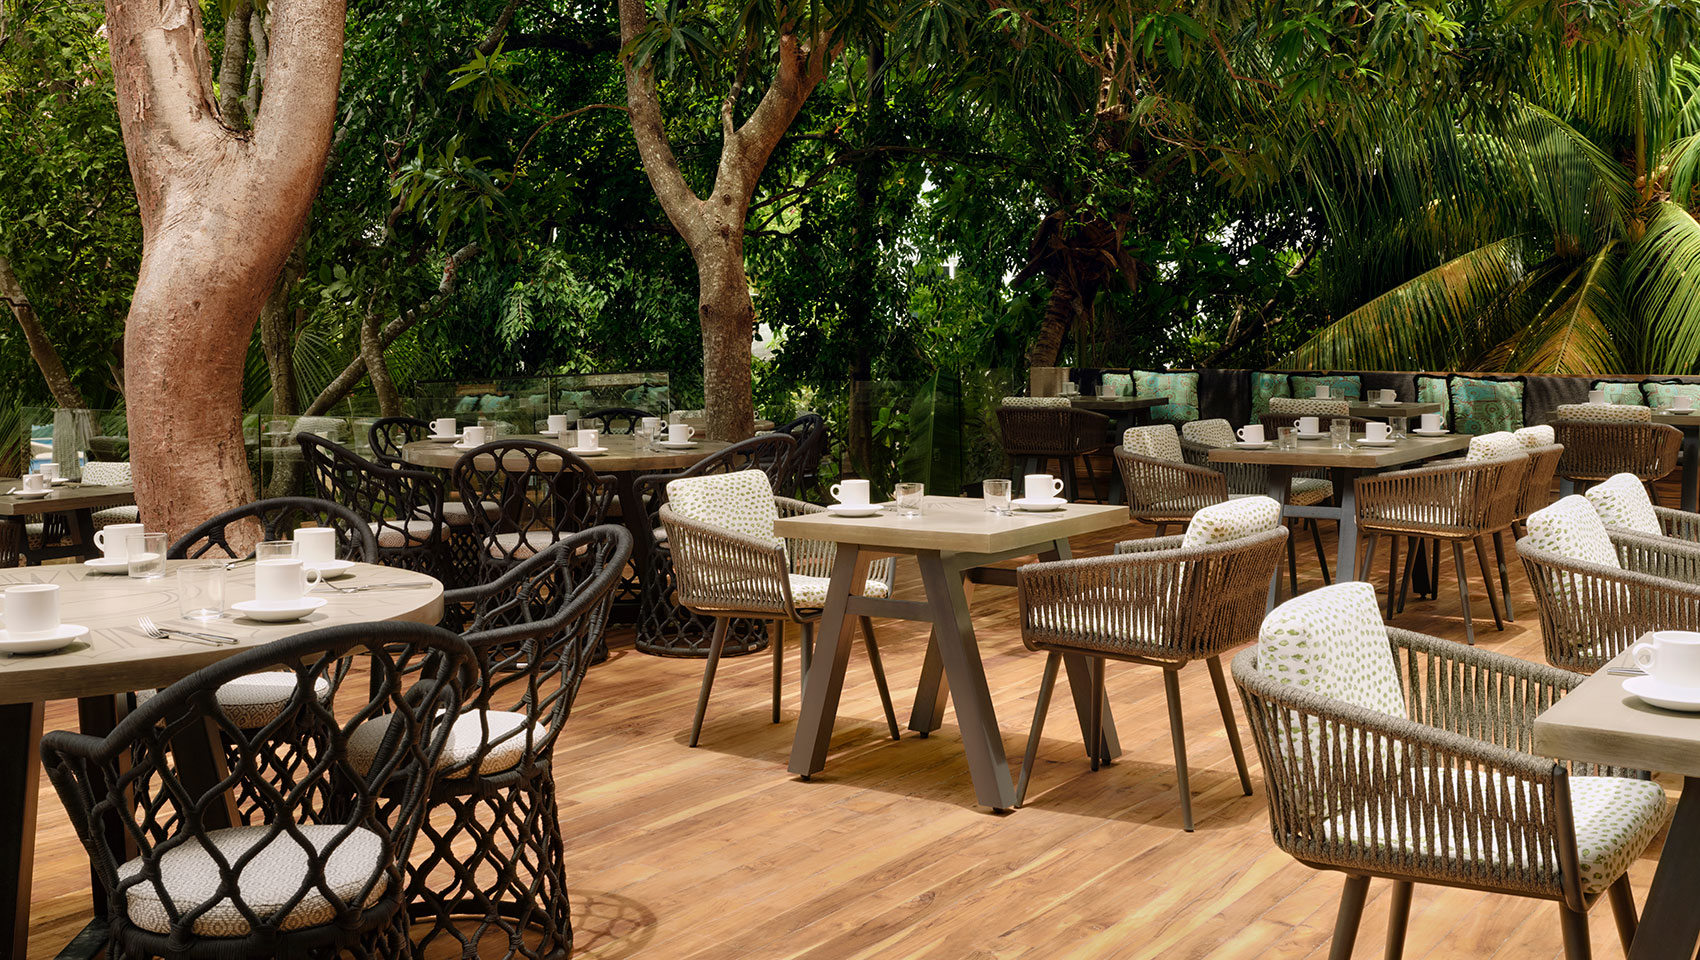 Patio dining at Alera surrounded by trees